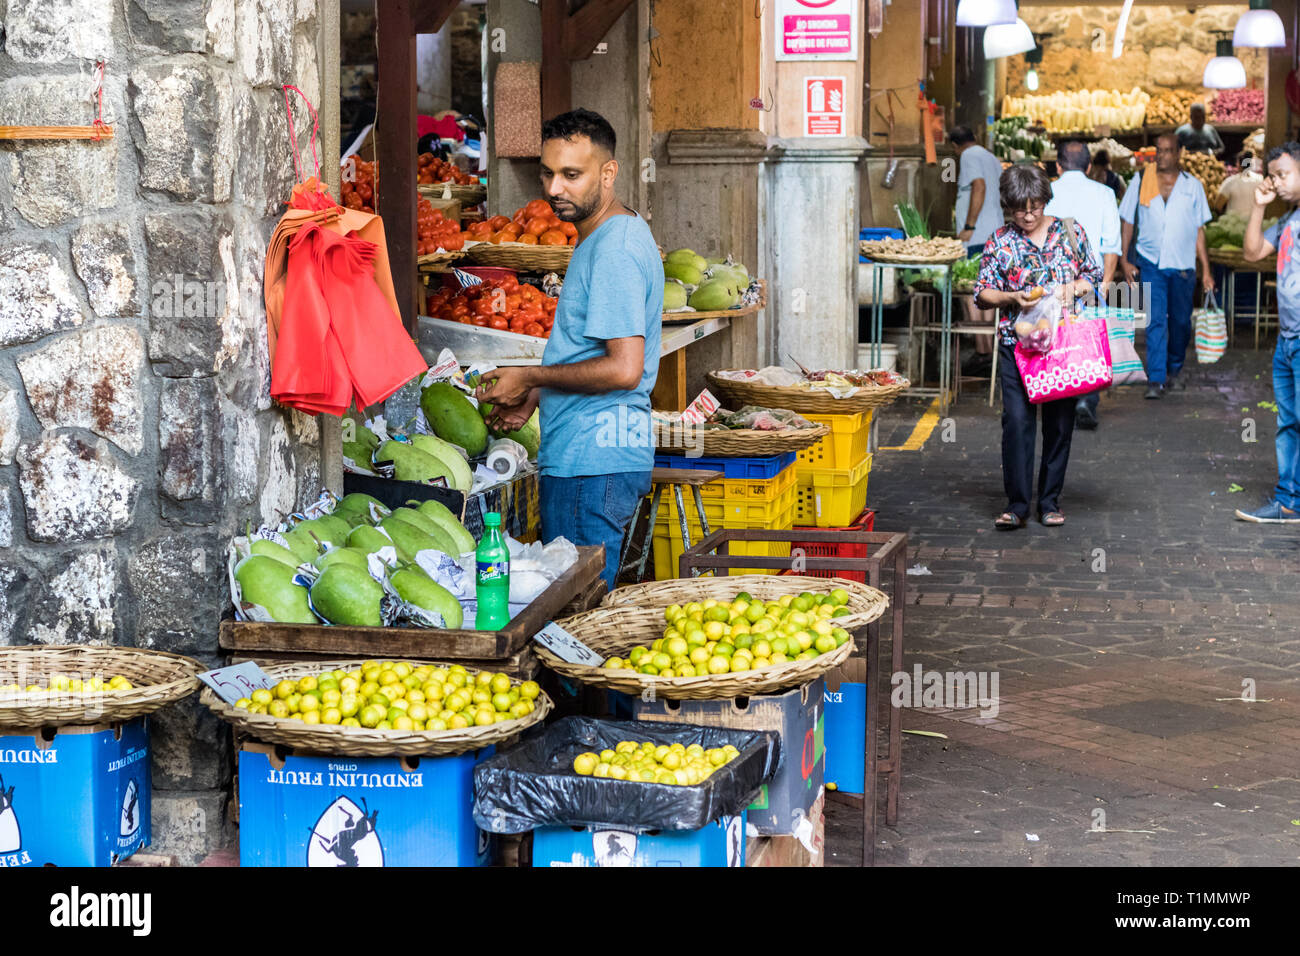 Port Louis, Mauritius - January 29, 2019: People and vendors at the Central Market in Port Louis, Mauritius. Stock Photo